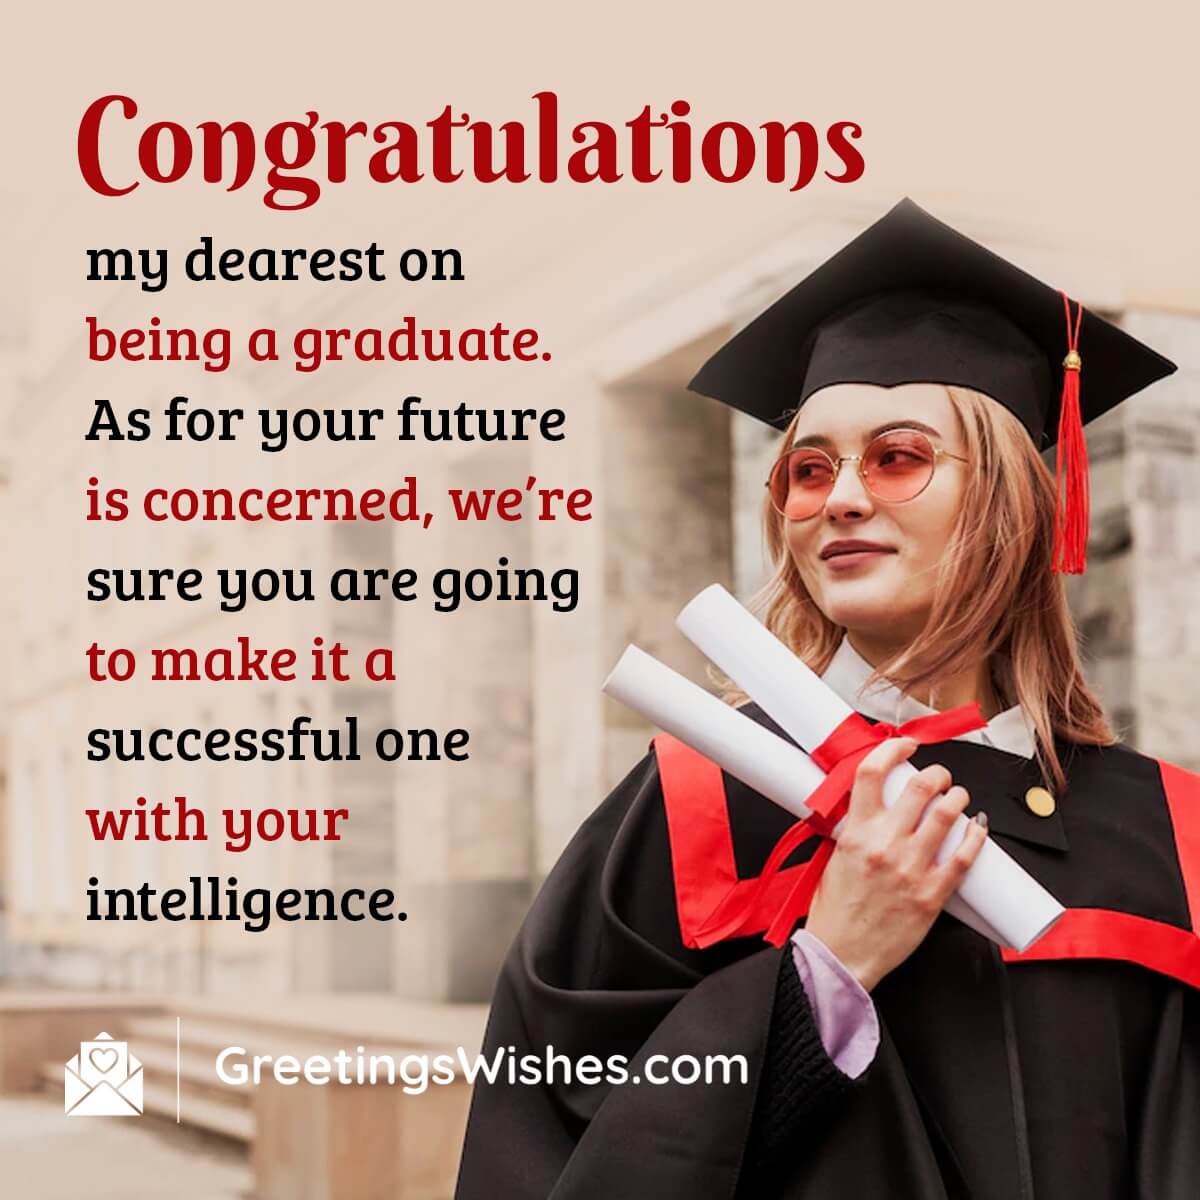 Graduation Wishes, Messages - Greetings Wishes